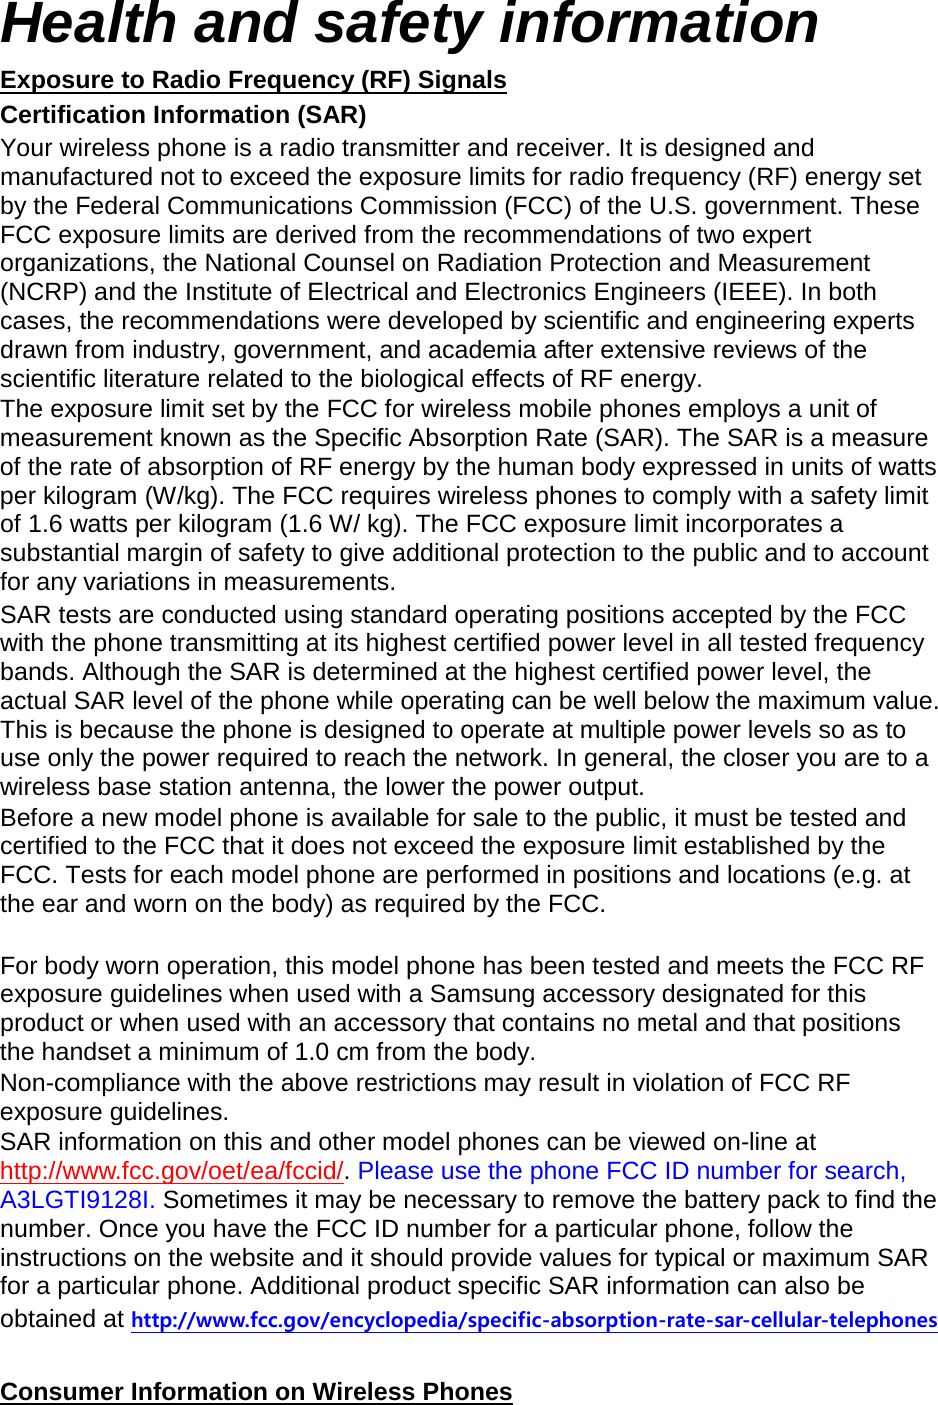 Health and safety information Exposure to Radio Frequency (RF) Signals Certification Information (SAR) Your wireless phone is a radio transmitter and receiver. It is designed and manufactured not to exceed the exposure limits for radio frequency (RF) energy set by the Federal Communications Commission (FCC) of the U.S. government. These FCC exposure limits are derived from the recommendations of two expert organizations, the National Counsel on Radiation Protection and Measurement (NCRP) and the Institute of Electrical and Electronics Engineers (IEEE). In both cases, the recommendations were developed by scientific and engineering experts drawn from industry, government, and academia after extensive reviews of the scientific literature related to the biological effects of RF energy. The exposure limit set by the FCC for wireless mobile phones employs a unit of measurement known as the Specific Absorption Rate (SAR). The SAR is a measure of the rate of absorption of RF energy by the human body expressed in units of watts per kilogram (W/kg). The FCC requires wireless phones to comply with a safety limit of 1.6 watts per kilogram (1.6 W/ kg). The FCC exposure limit incorporates a substantial margin of safety to give additional protection to the public and to account for any variations in measurements. SAR tests are conducted using standard operating positions accepted by the FCC with the phone transmitting at its highest certified power level in all tested frequency bands. Although the SAR is determined at the highest certified power level, the actual SAR level of the phone while operating can be well below the maximum value. This is because the phone is designed to operate at multiple power levels so as to use only the power required to reach the network. In general, the closer you are to a wireless base station antenna, the lower the power output. Before a new model phone is available for sale to the public, it must be tested and certified to the FCC that it does not exceed the exposure limit established by the FCC. Tests for each model phone are performed in positions and locations (e.g. at the ear and worn on the body) as required by the FCC.      For body worn operation, this model phone has been tested and meets the FCC RF exposure guidelines when used with a Samsung accessory designated for this product or when used with an accessory that contains no metal and that positions the handset a minimum of 1.0 cm from the body.   Non-compliance with the above restrictions may result in violation of FCC RF exposure guidelines. SAR information on this and other model phones can be viewed on-line at http://www.fcc.gov/oet/ea/fccid/. Please use the phone FCC ID number for search, A3LGTI9128I. Sometimes it may be necessary to remove the battery pack to find the number. Once you have the FCC ID number for a particular phone, follow the instructions on the website and it should provide values for typical or maximum SAR for a particular phone. Additional product specific SAR information can also be obtained at http://www.fcc.gov/encyclopedia/specific-absorption-rate-sar-cellular-telephones  Consumer Information on Wireless Phones 